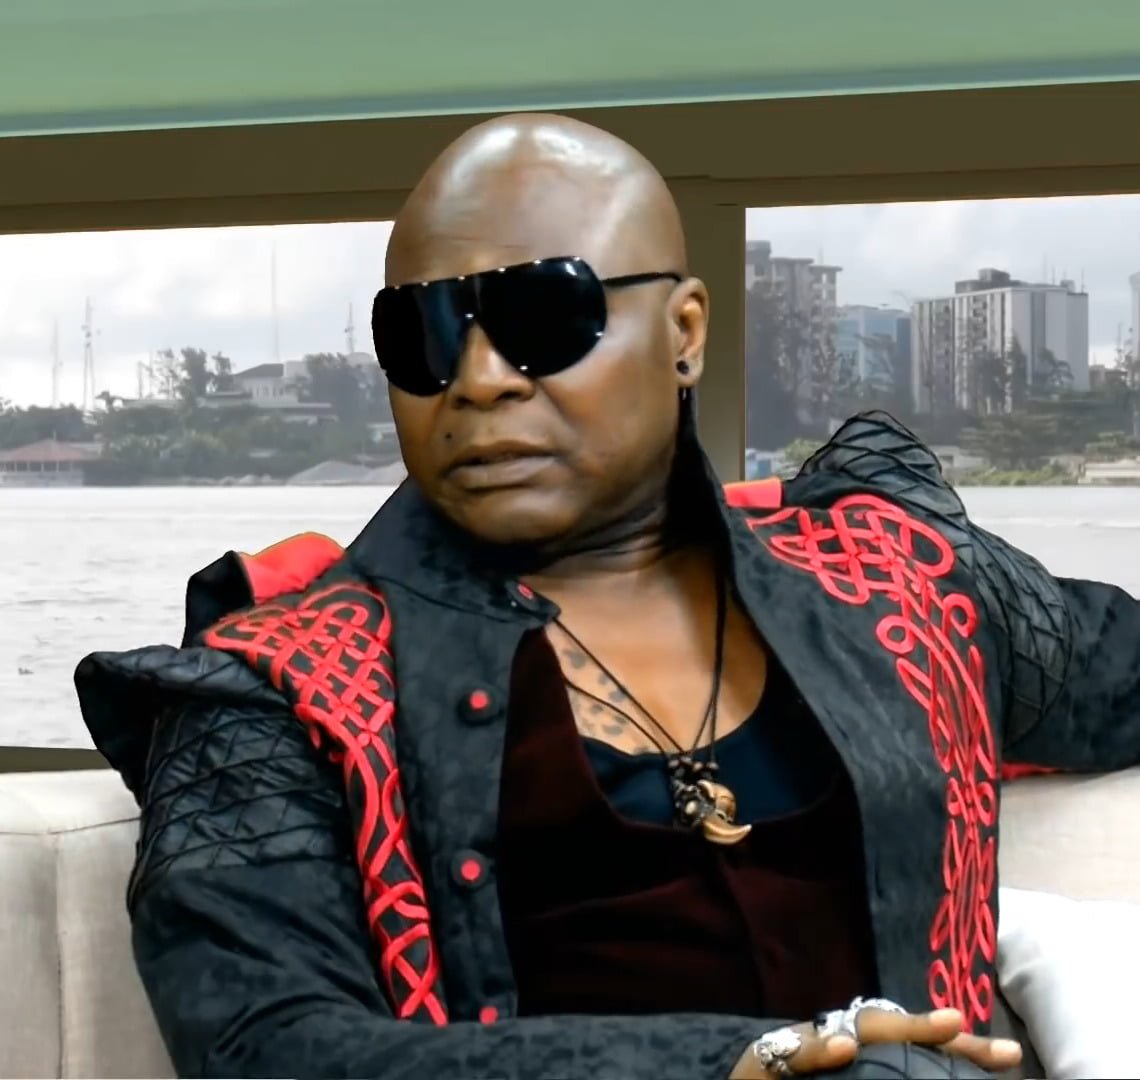 Charlyboy Simon Ekpa's arrest prompted Charly Boy to scream, "May he burn in hell."